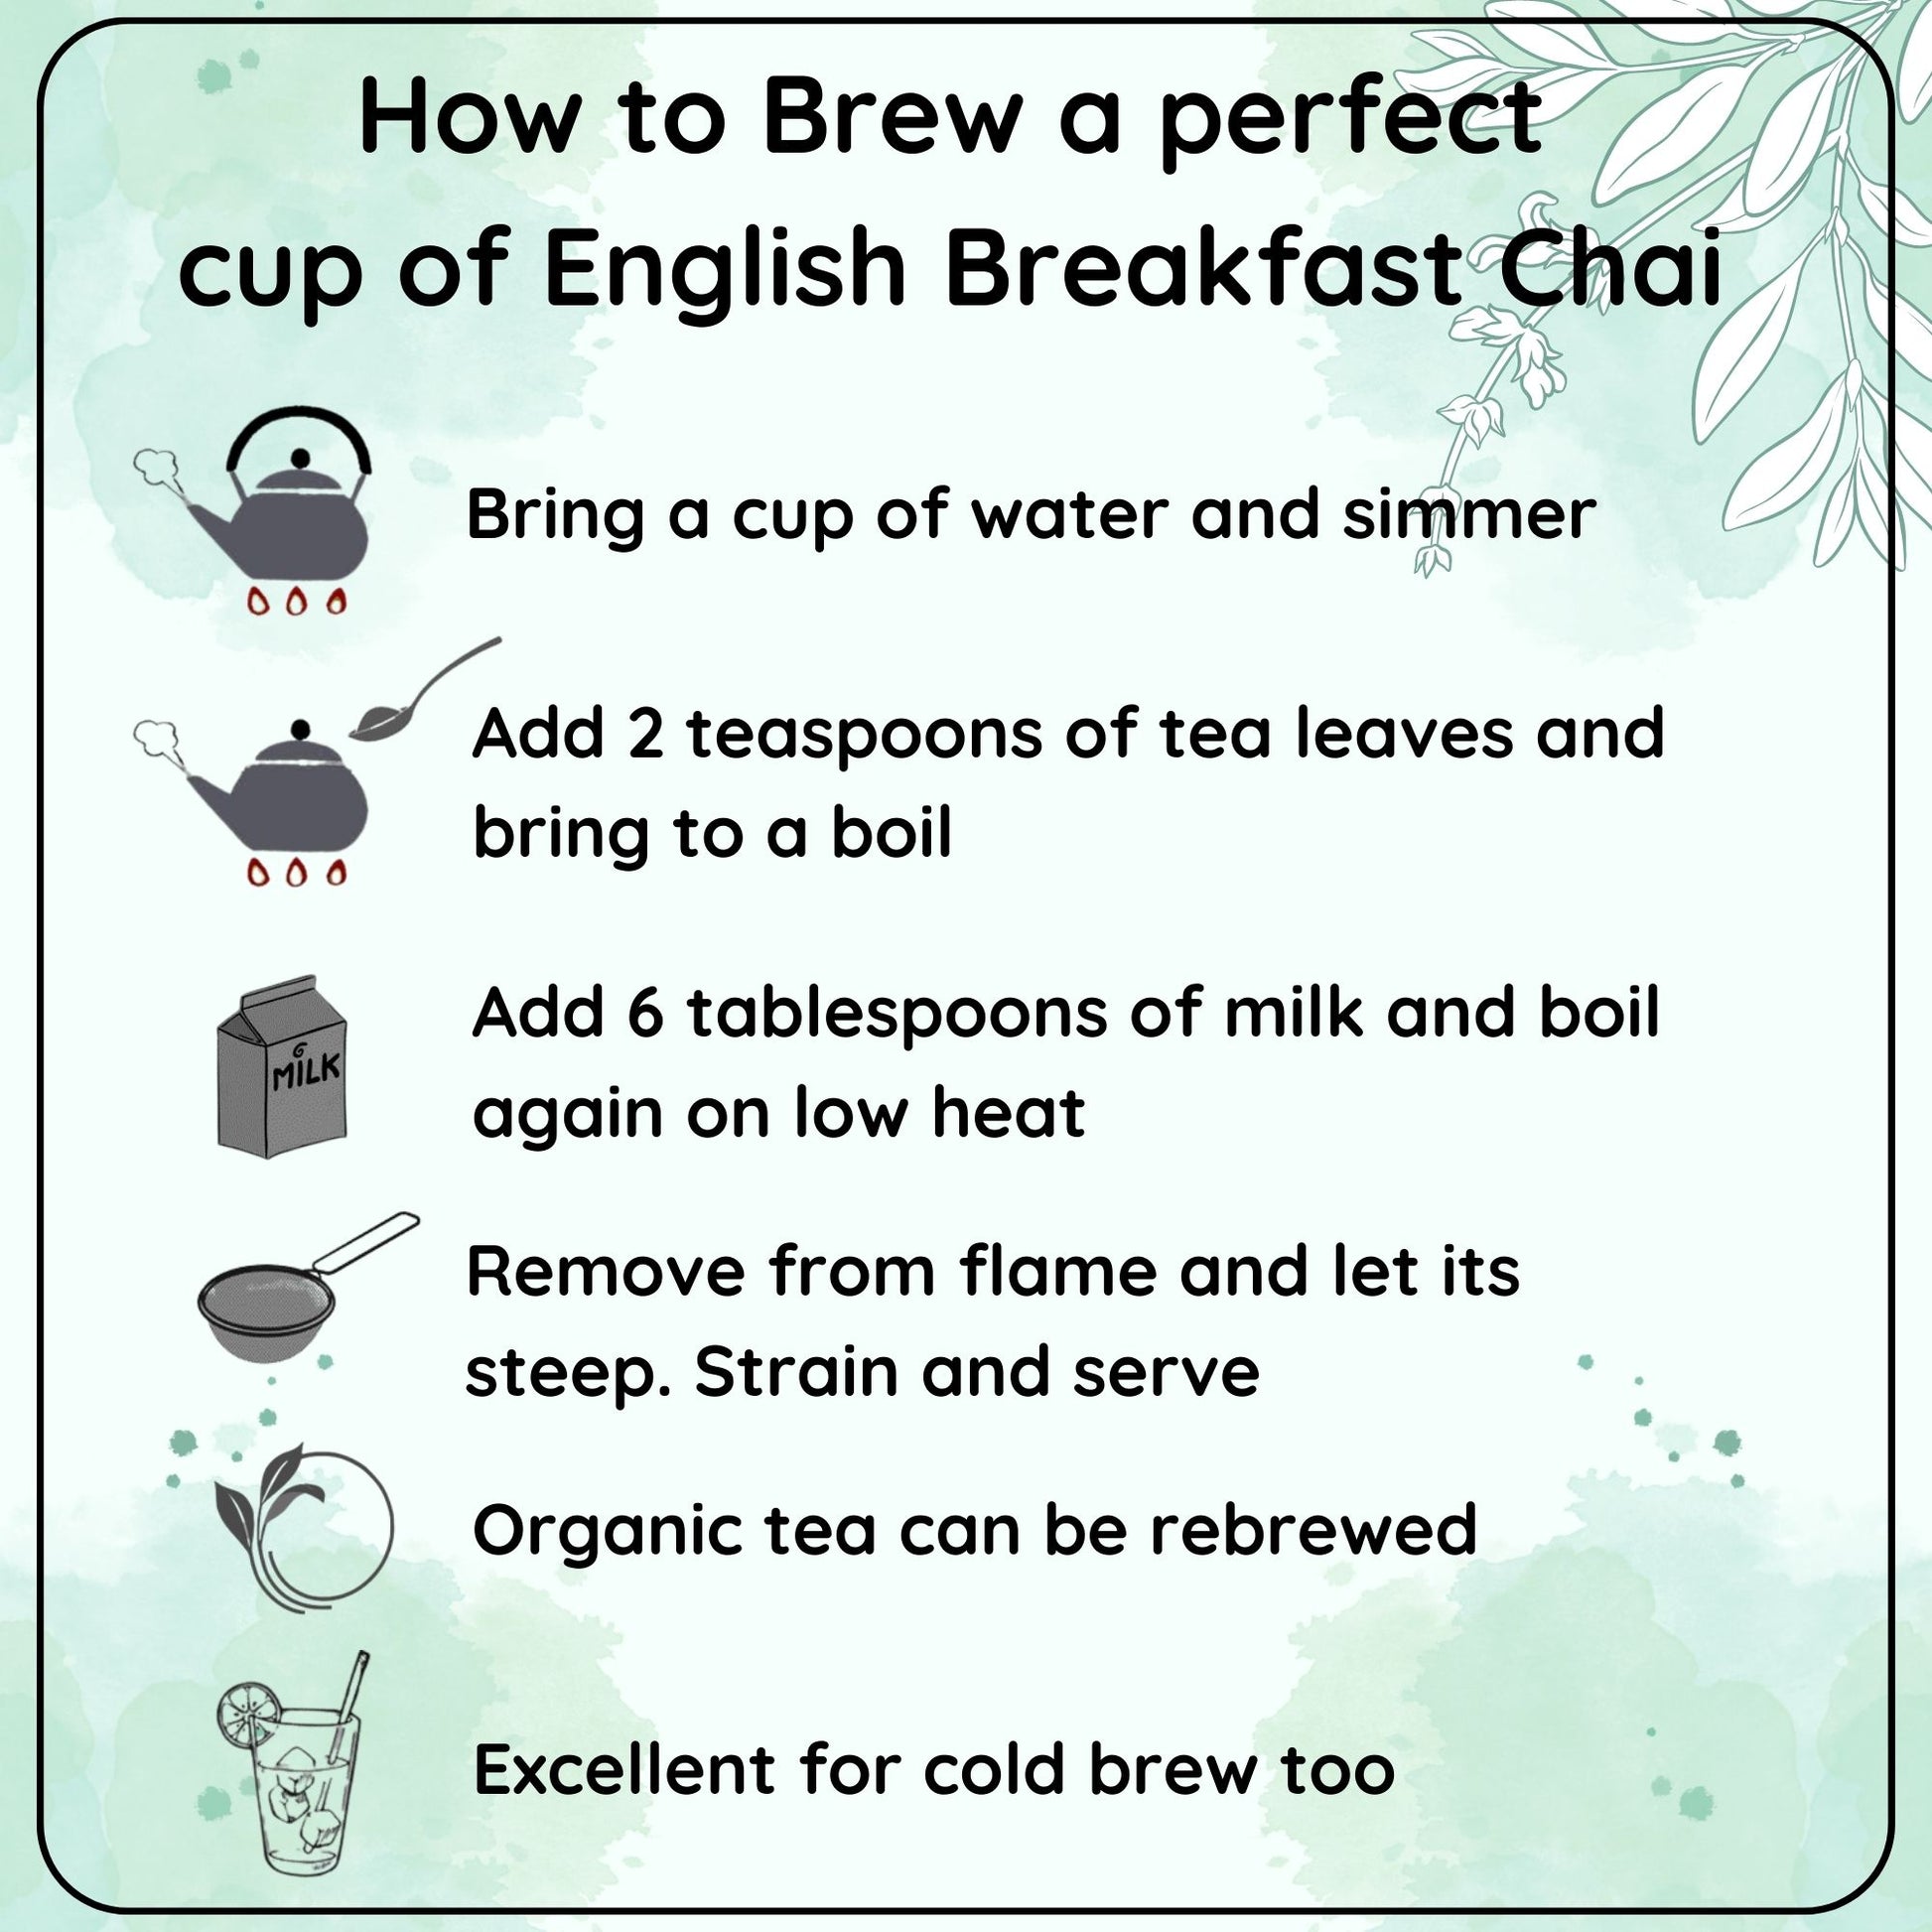 REJUVENATING English Breakfast Chai - How English Breakfast Chai Can Boost Your Mood and Energy - Radhikas Fine Teas and Whatnots